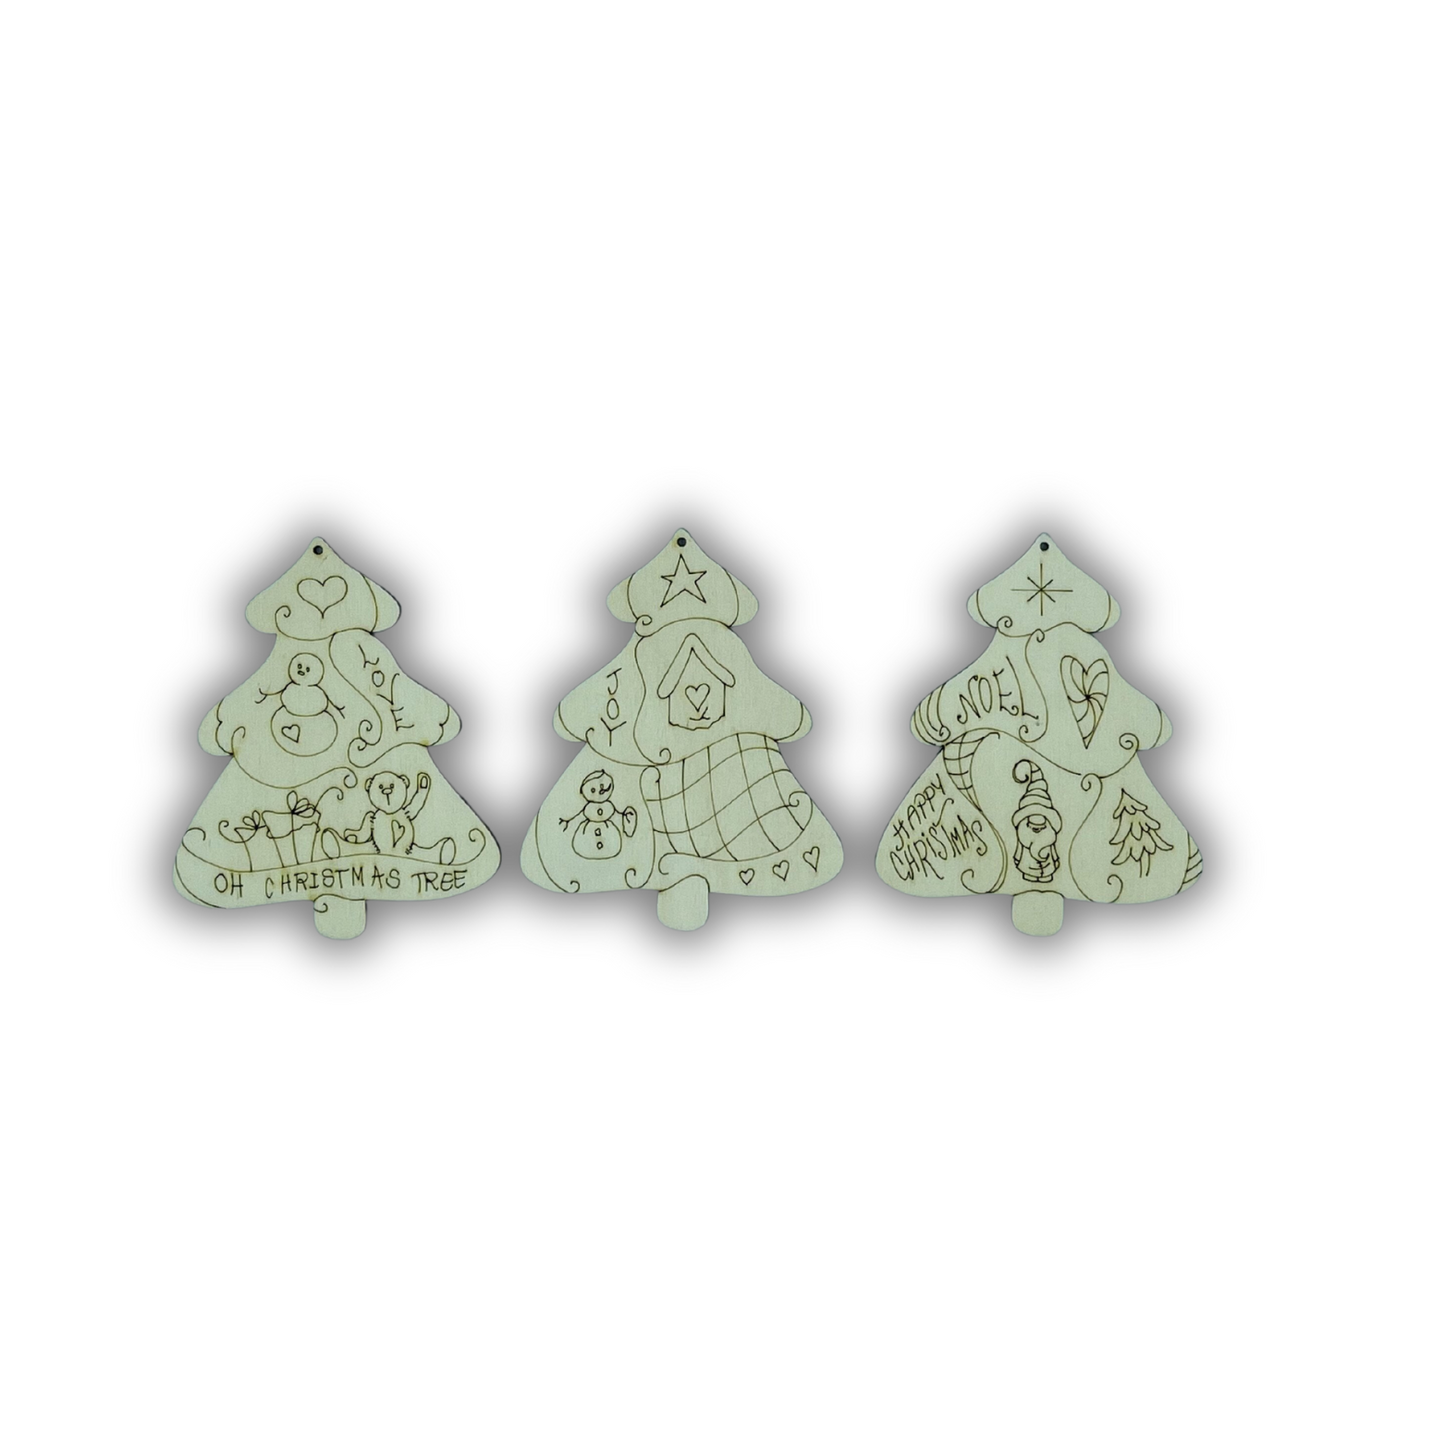 Festive ornament trio free extra linedraw Out of the Wood